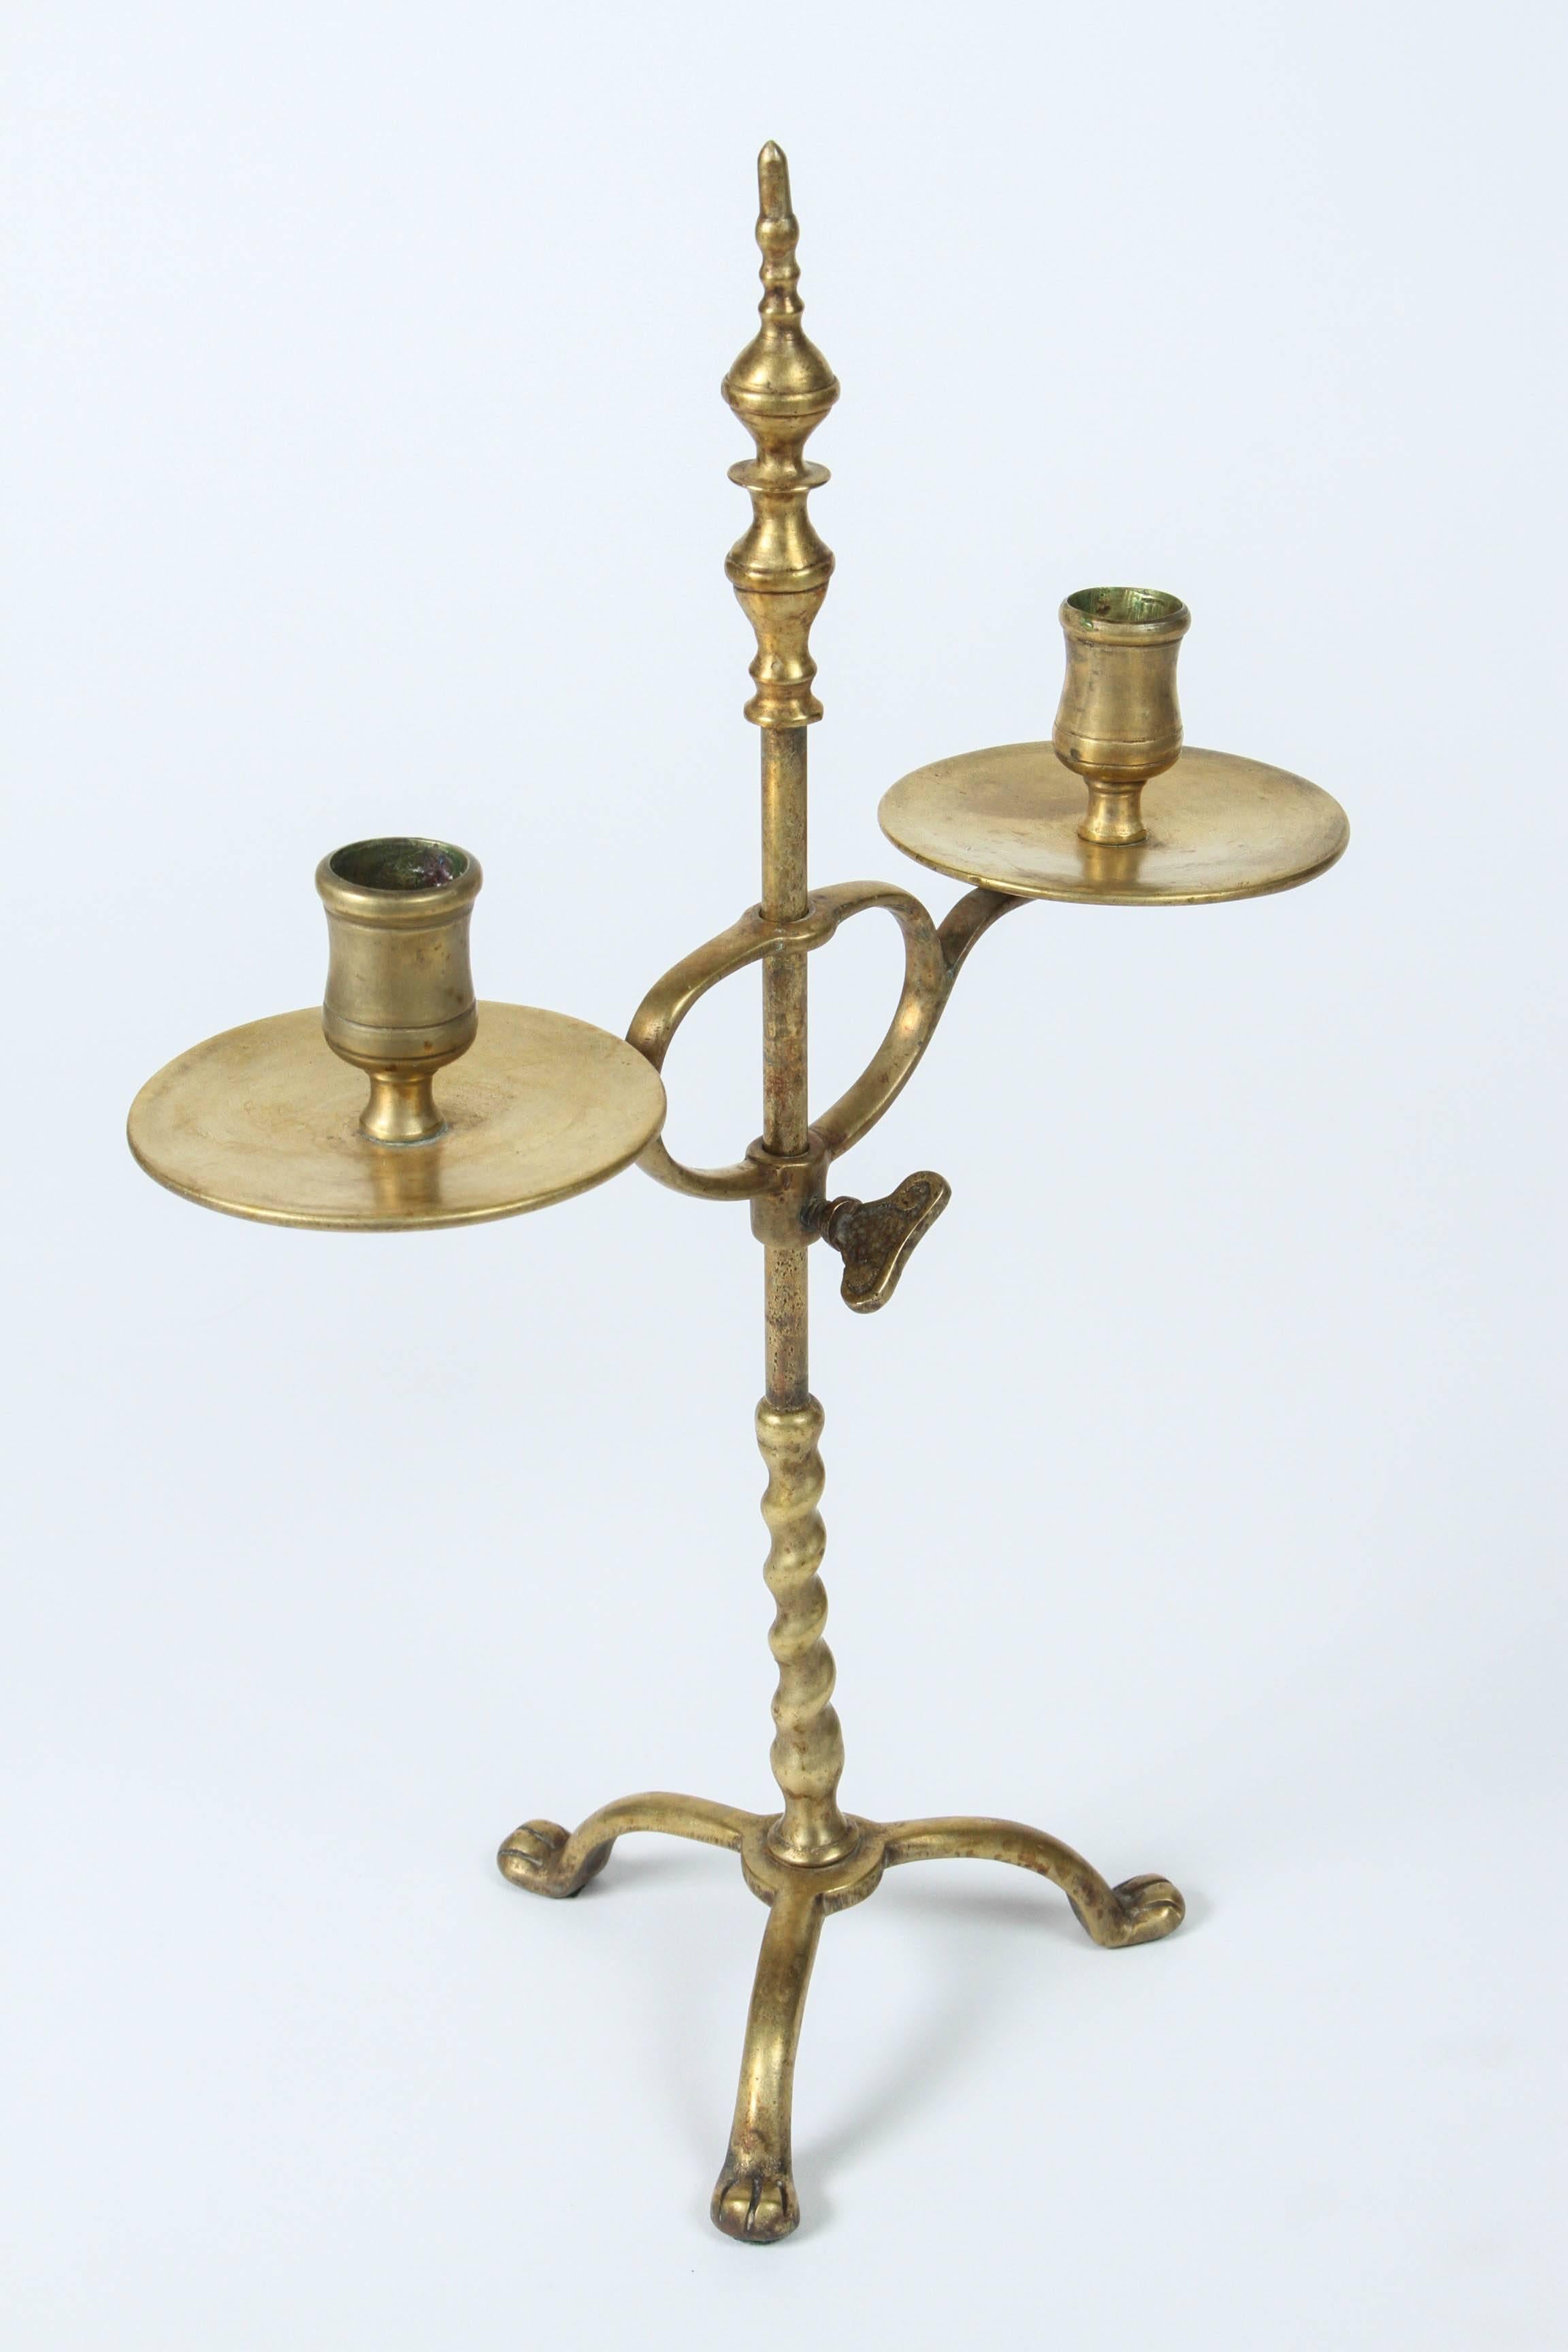 Vintage English brass two-arm candleholder with adjustable height.